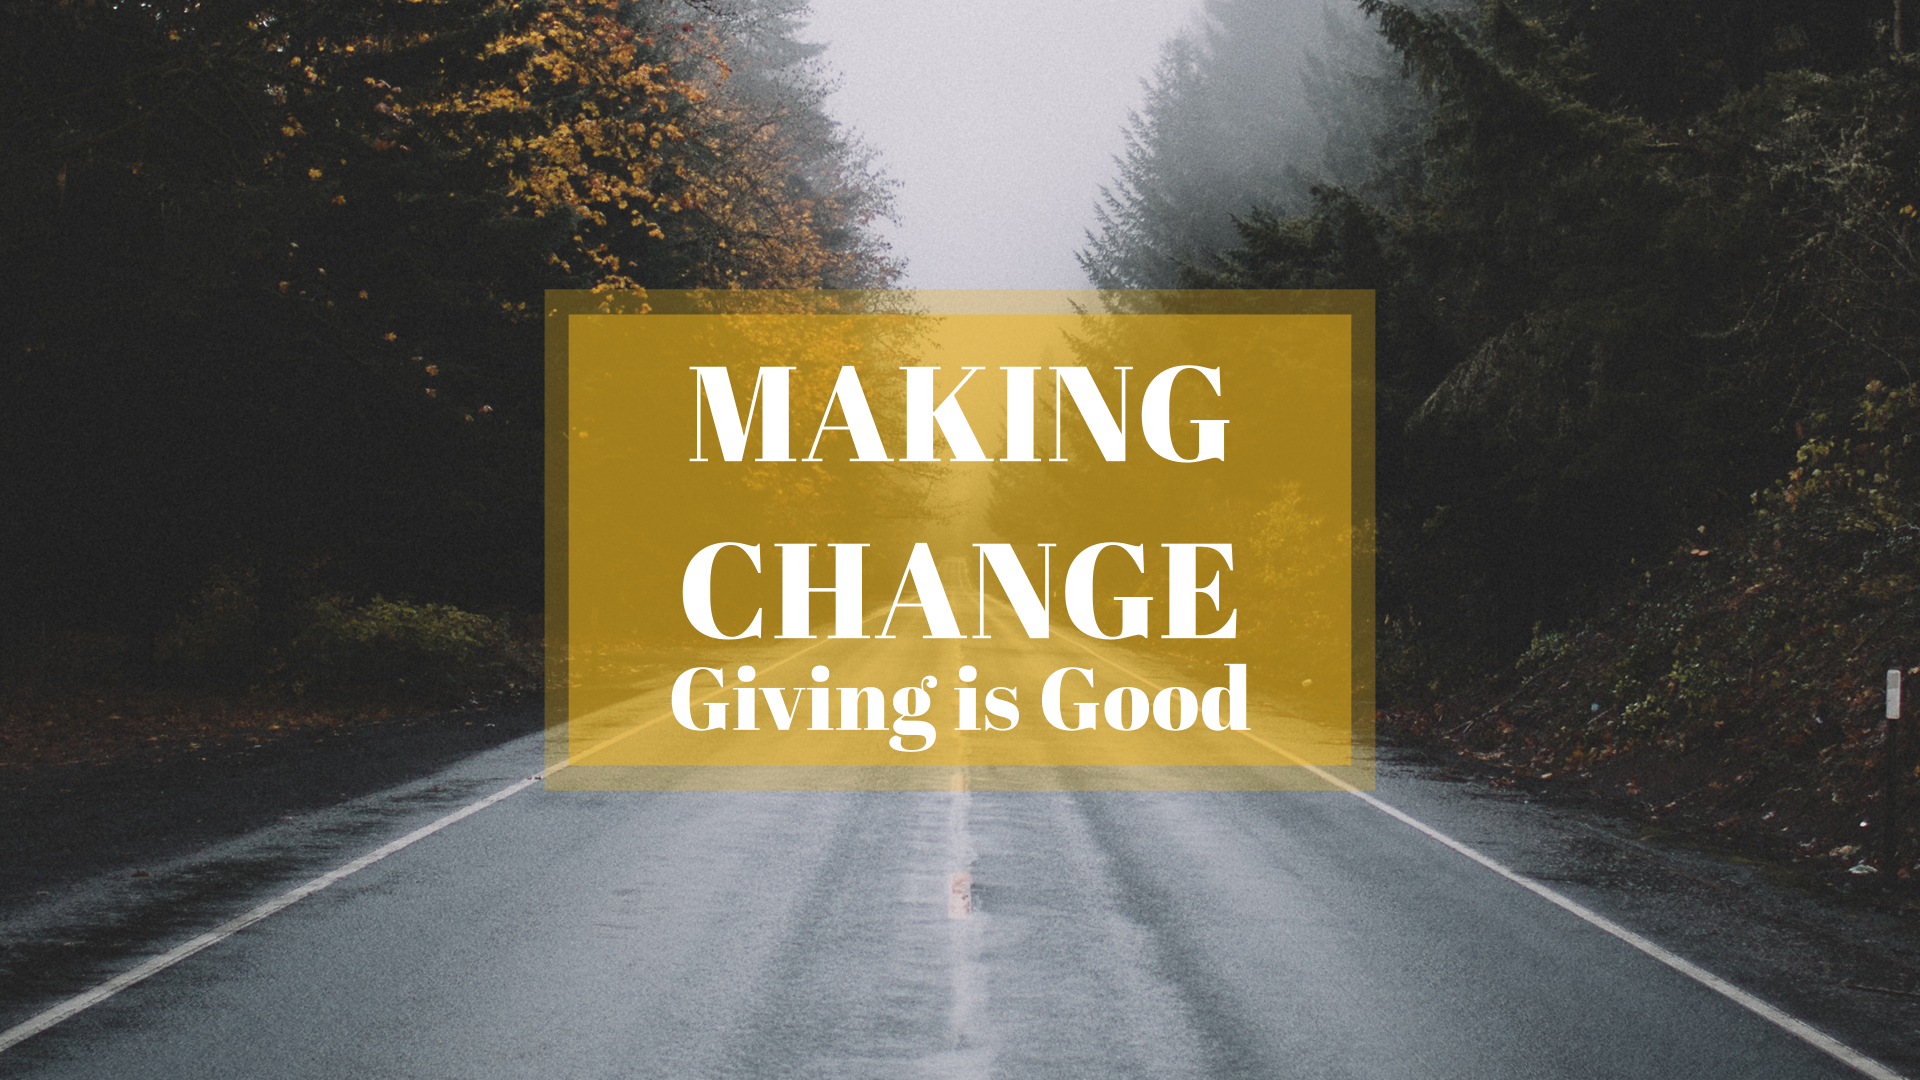 Making Change: Giving is Good